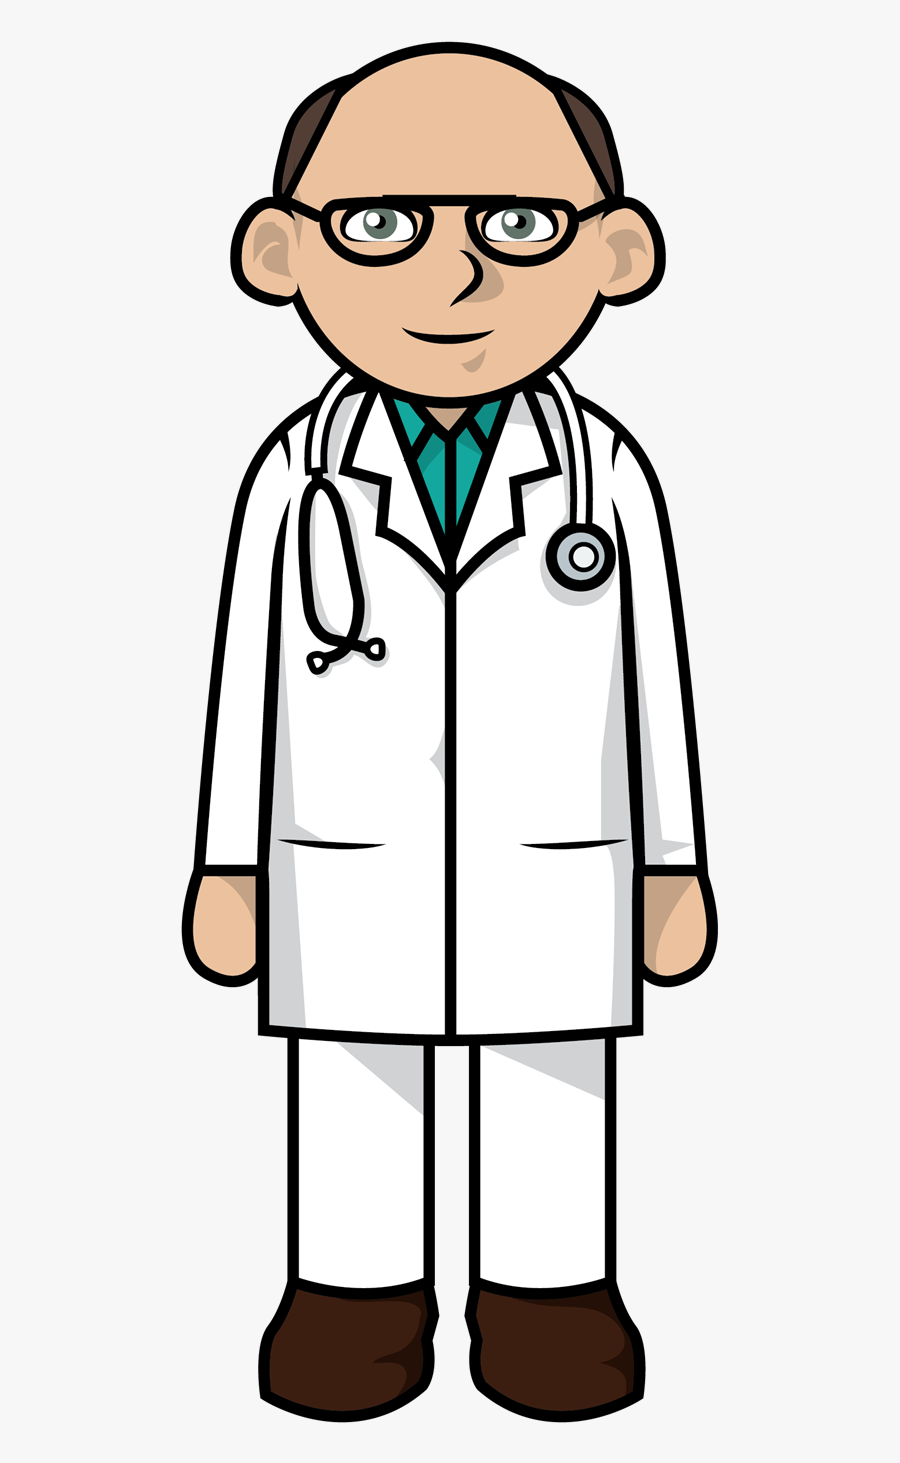 Doctor Clipart Transparent - Doctor White Coat Clipart, Transparent Clipart